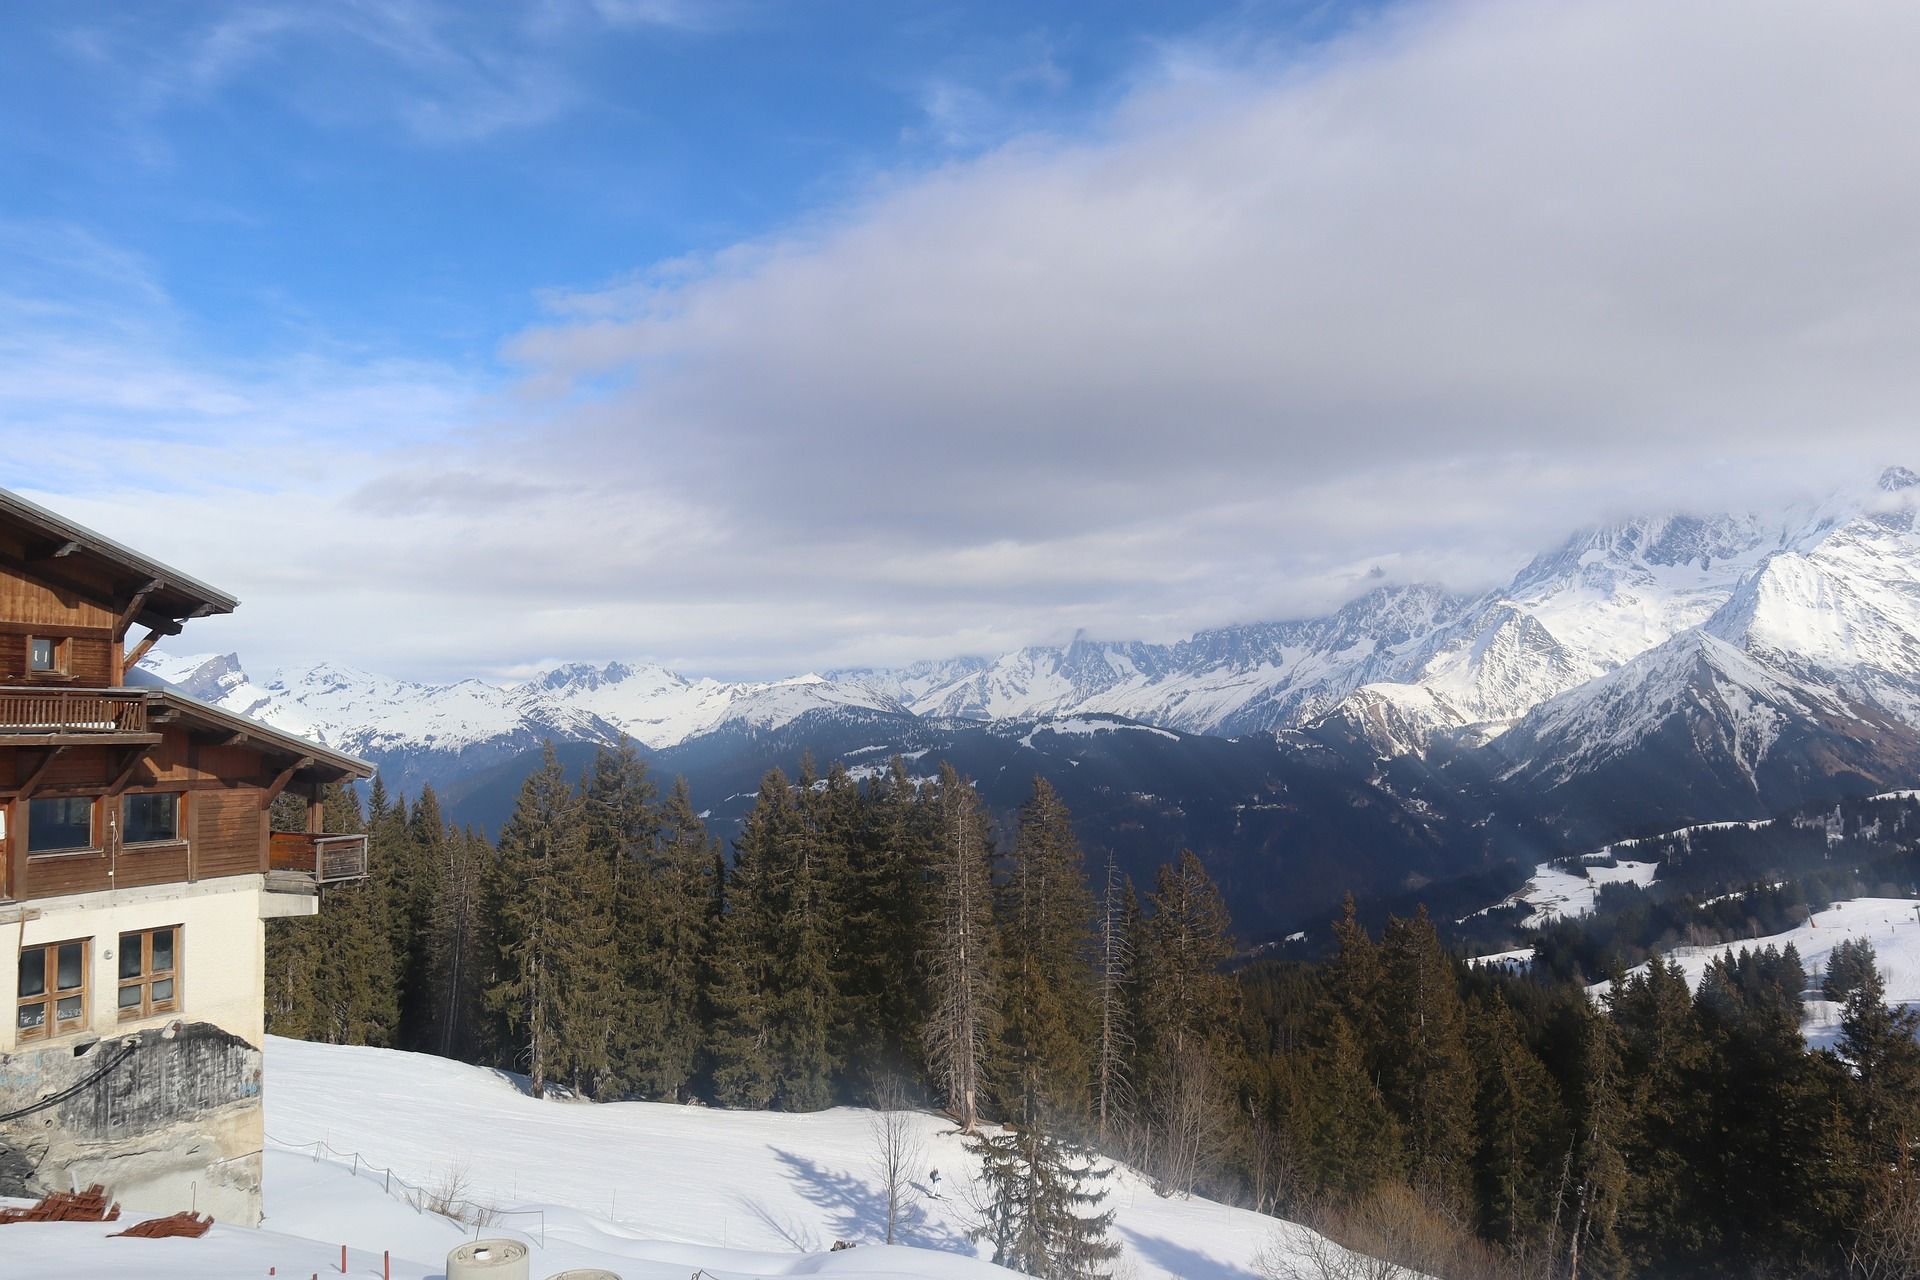 A view of snow-capped mountains from Megeve, France